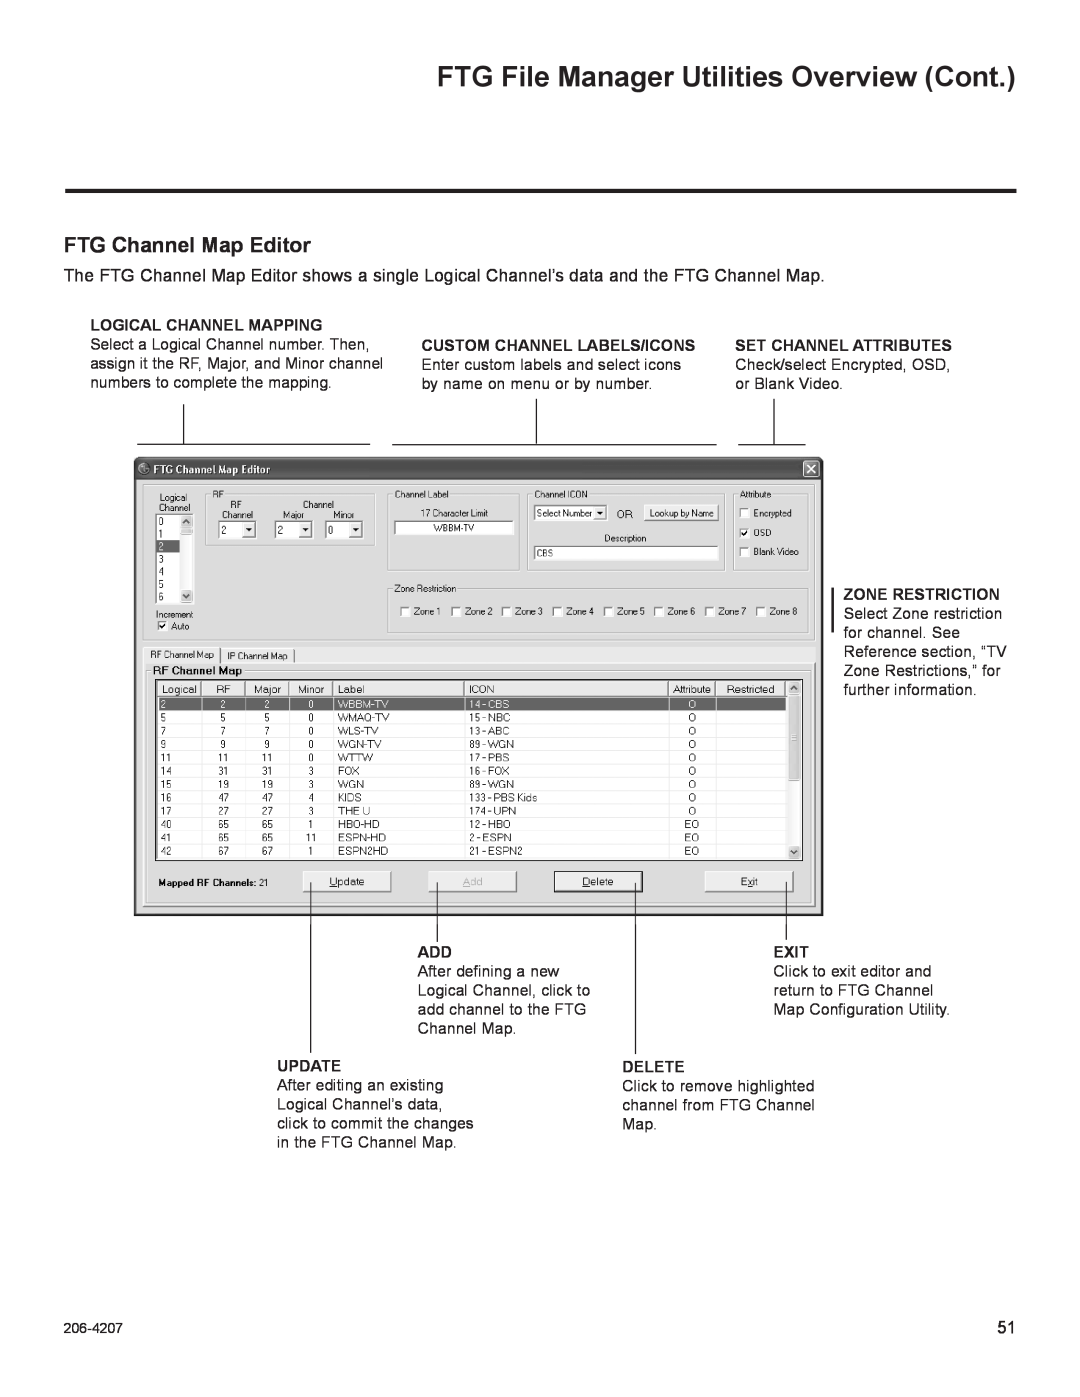 LG Electronics 32LQ630H, 42CQ610H FTG File Manager Utilities Overview Cont, FTG Channel Map Editor, Exit, Update, Delete 